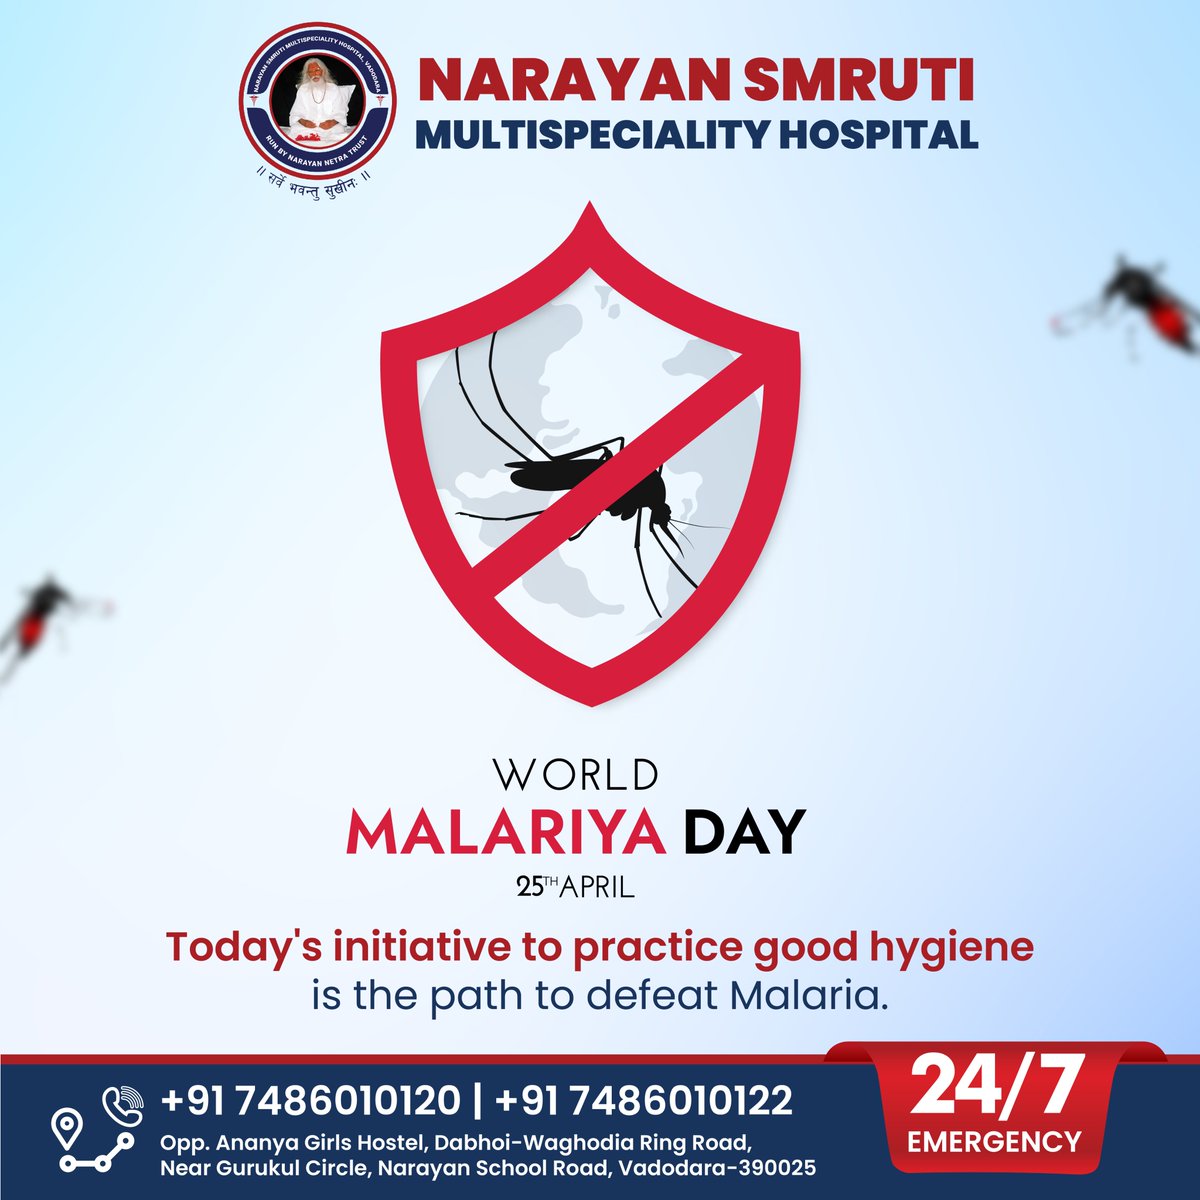 Do not let Malaria keep you bedridden. On World Malaria Day, be the reason and initiator to spread awareness about the causes of Malaria and how we can avoid spreading it by maintaining proper hygiene and cleanliness. #MalariaDay #Mosquito #Malaria #EndMalaria #WorldMalariaDay